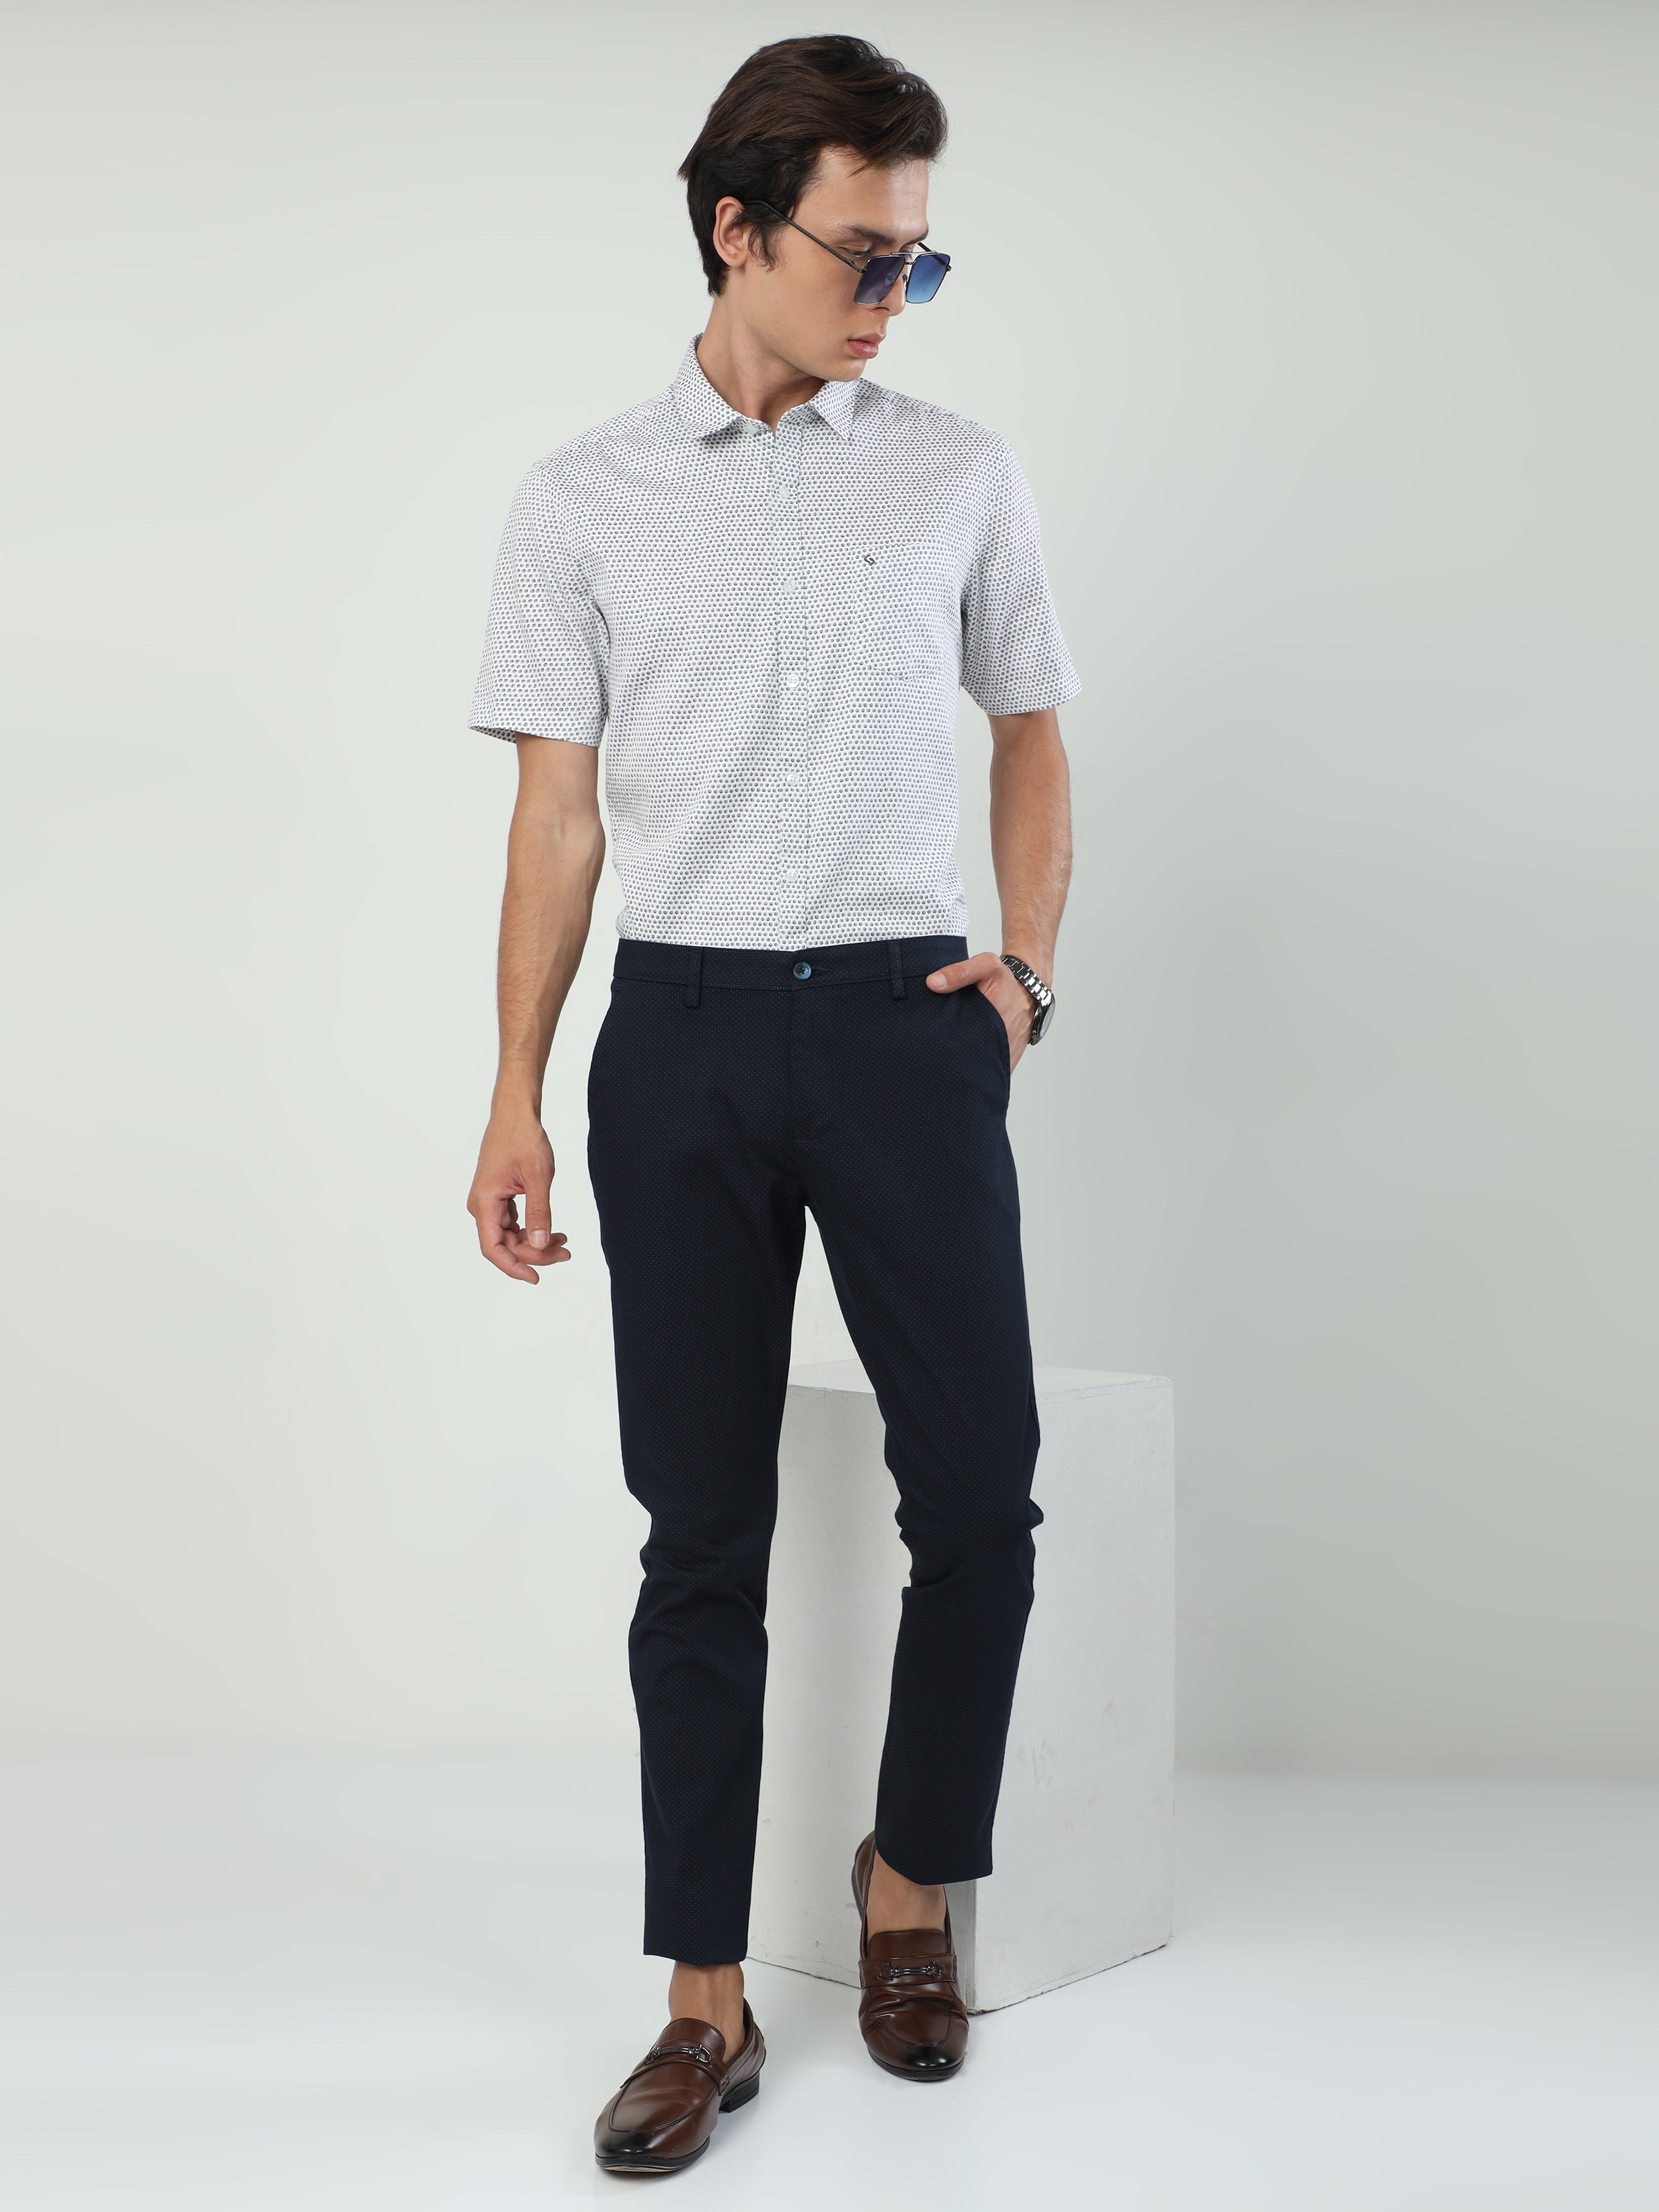 Classic Polo Men's   Moderate Fit Cotton Trousers | TO2-51 A-NVY-MF-LY